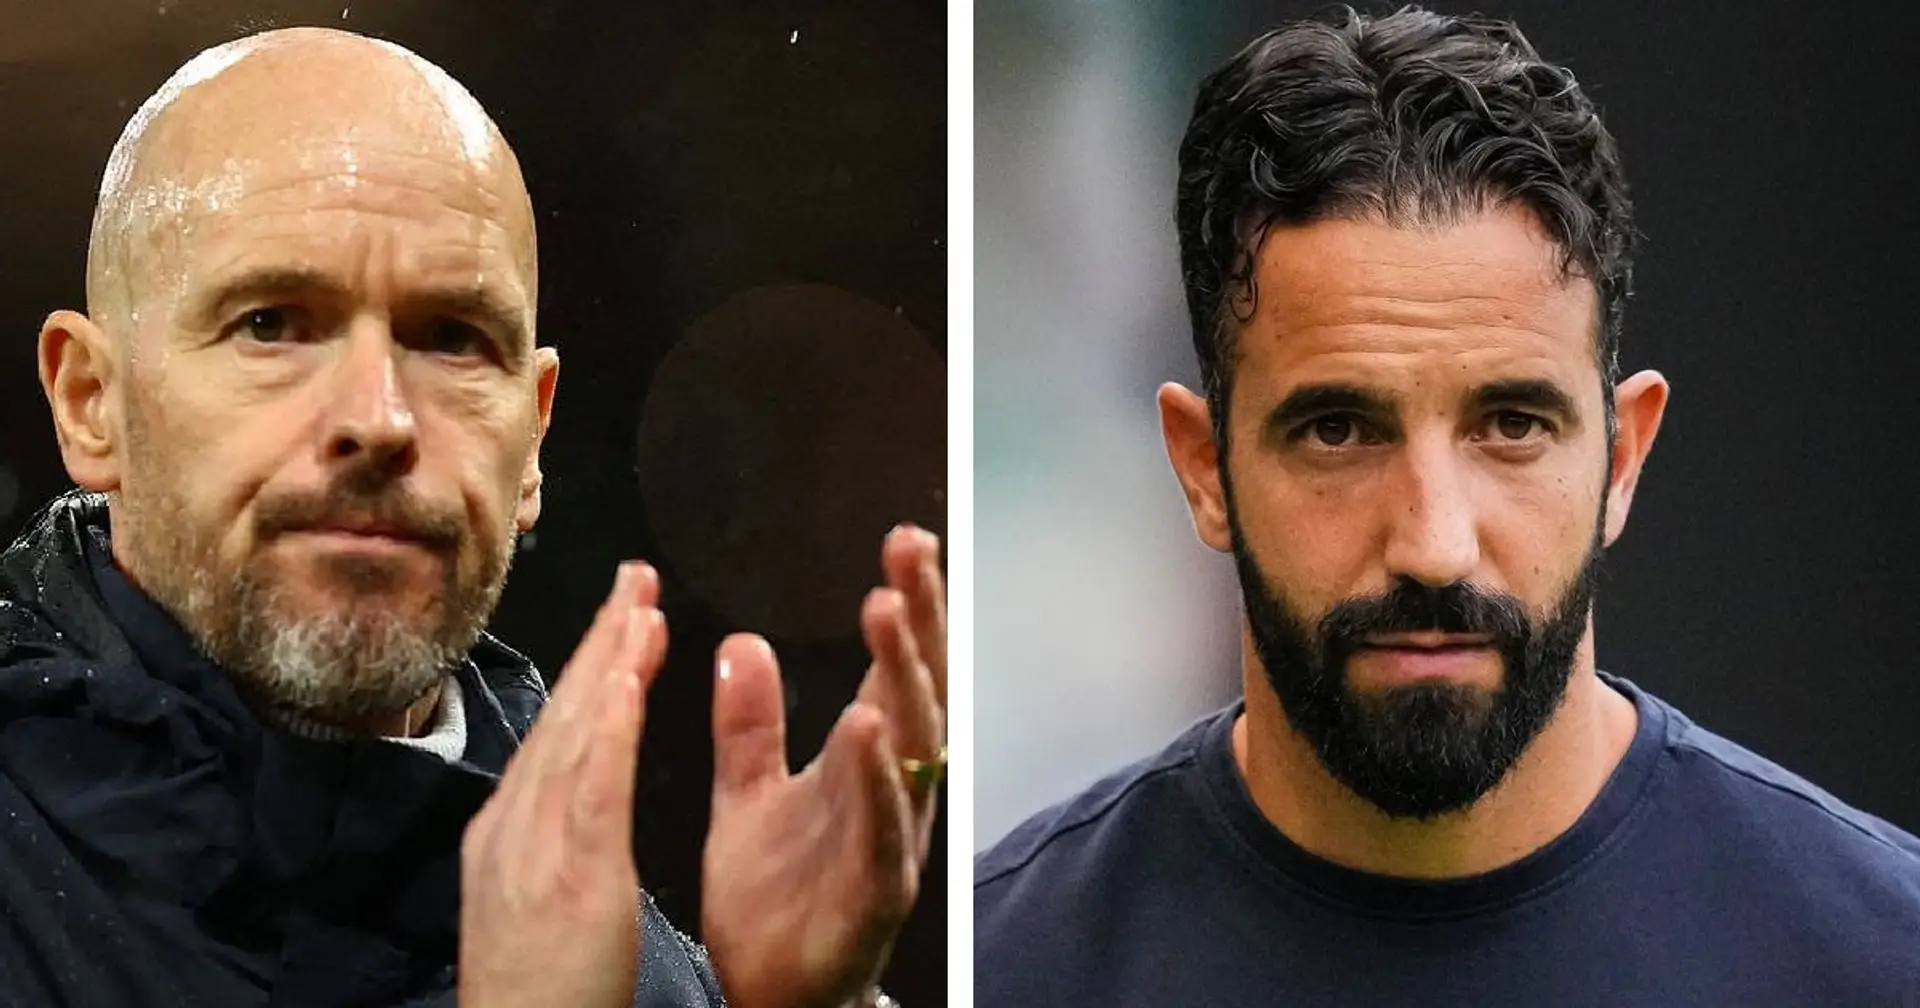 'Wouldn't swap him for Amorim': Man United urged to give Ten Hag 3 years